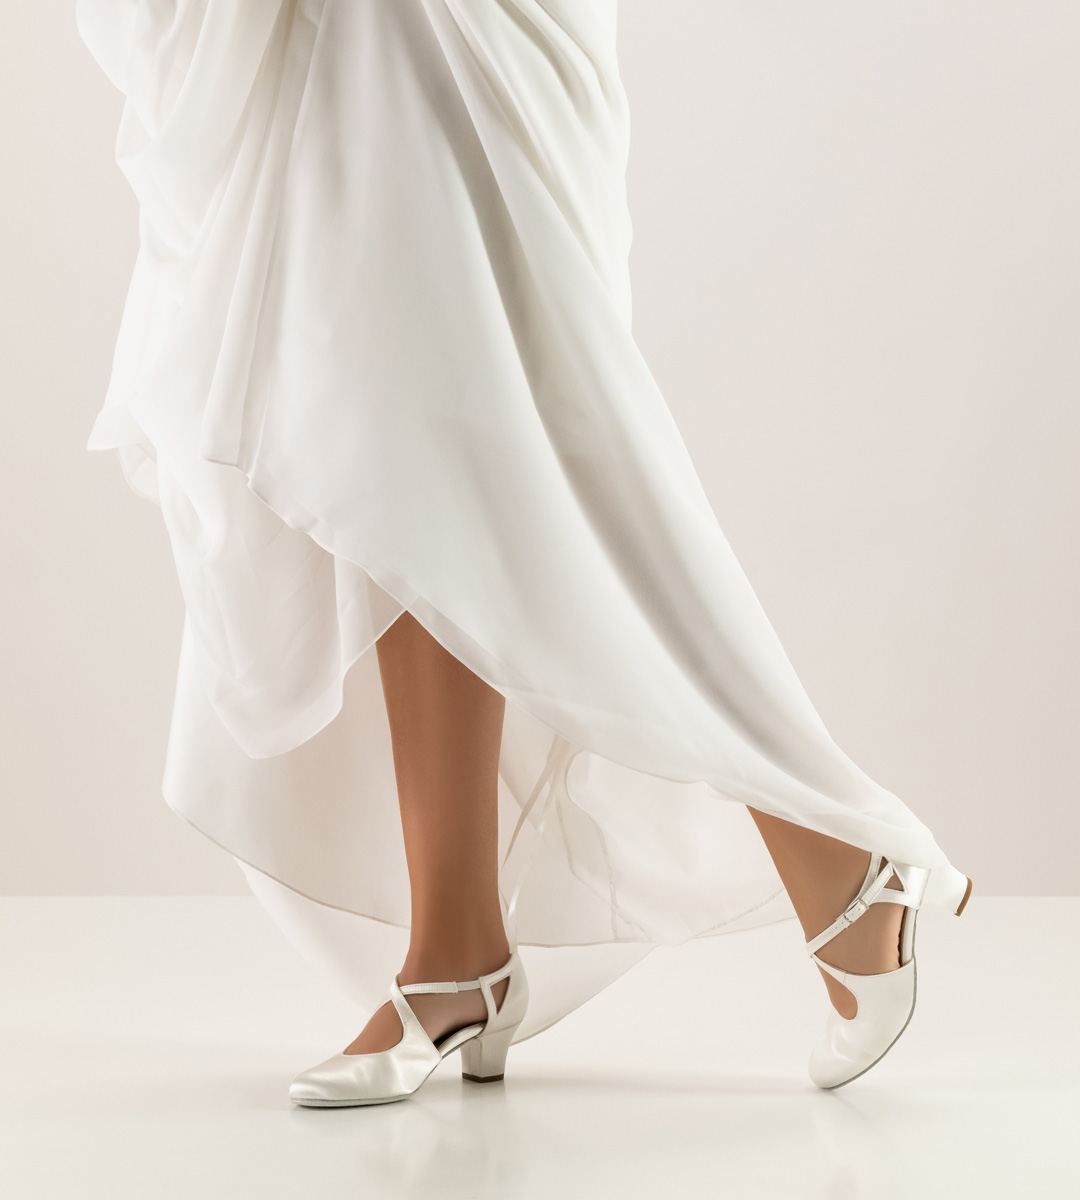 White bridal shoe by Werner Kern in combination with white wedding dress